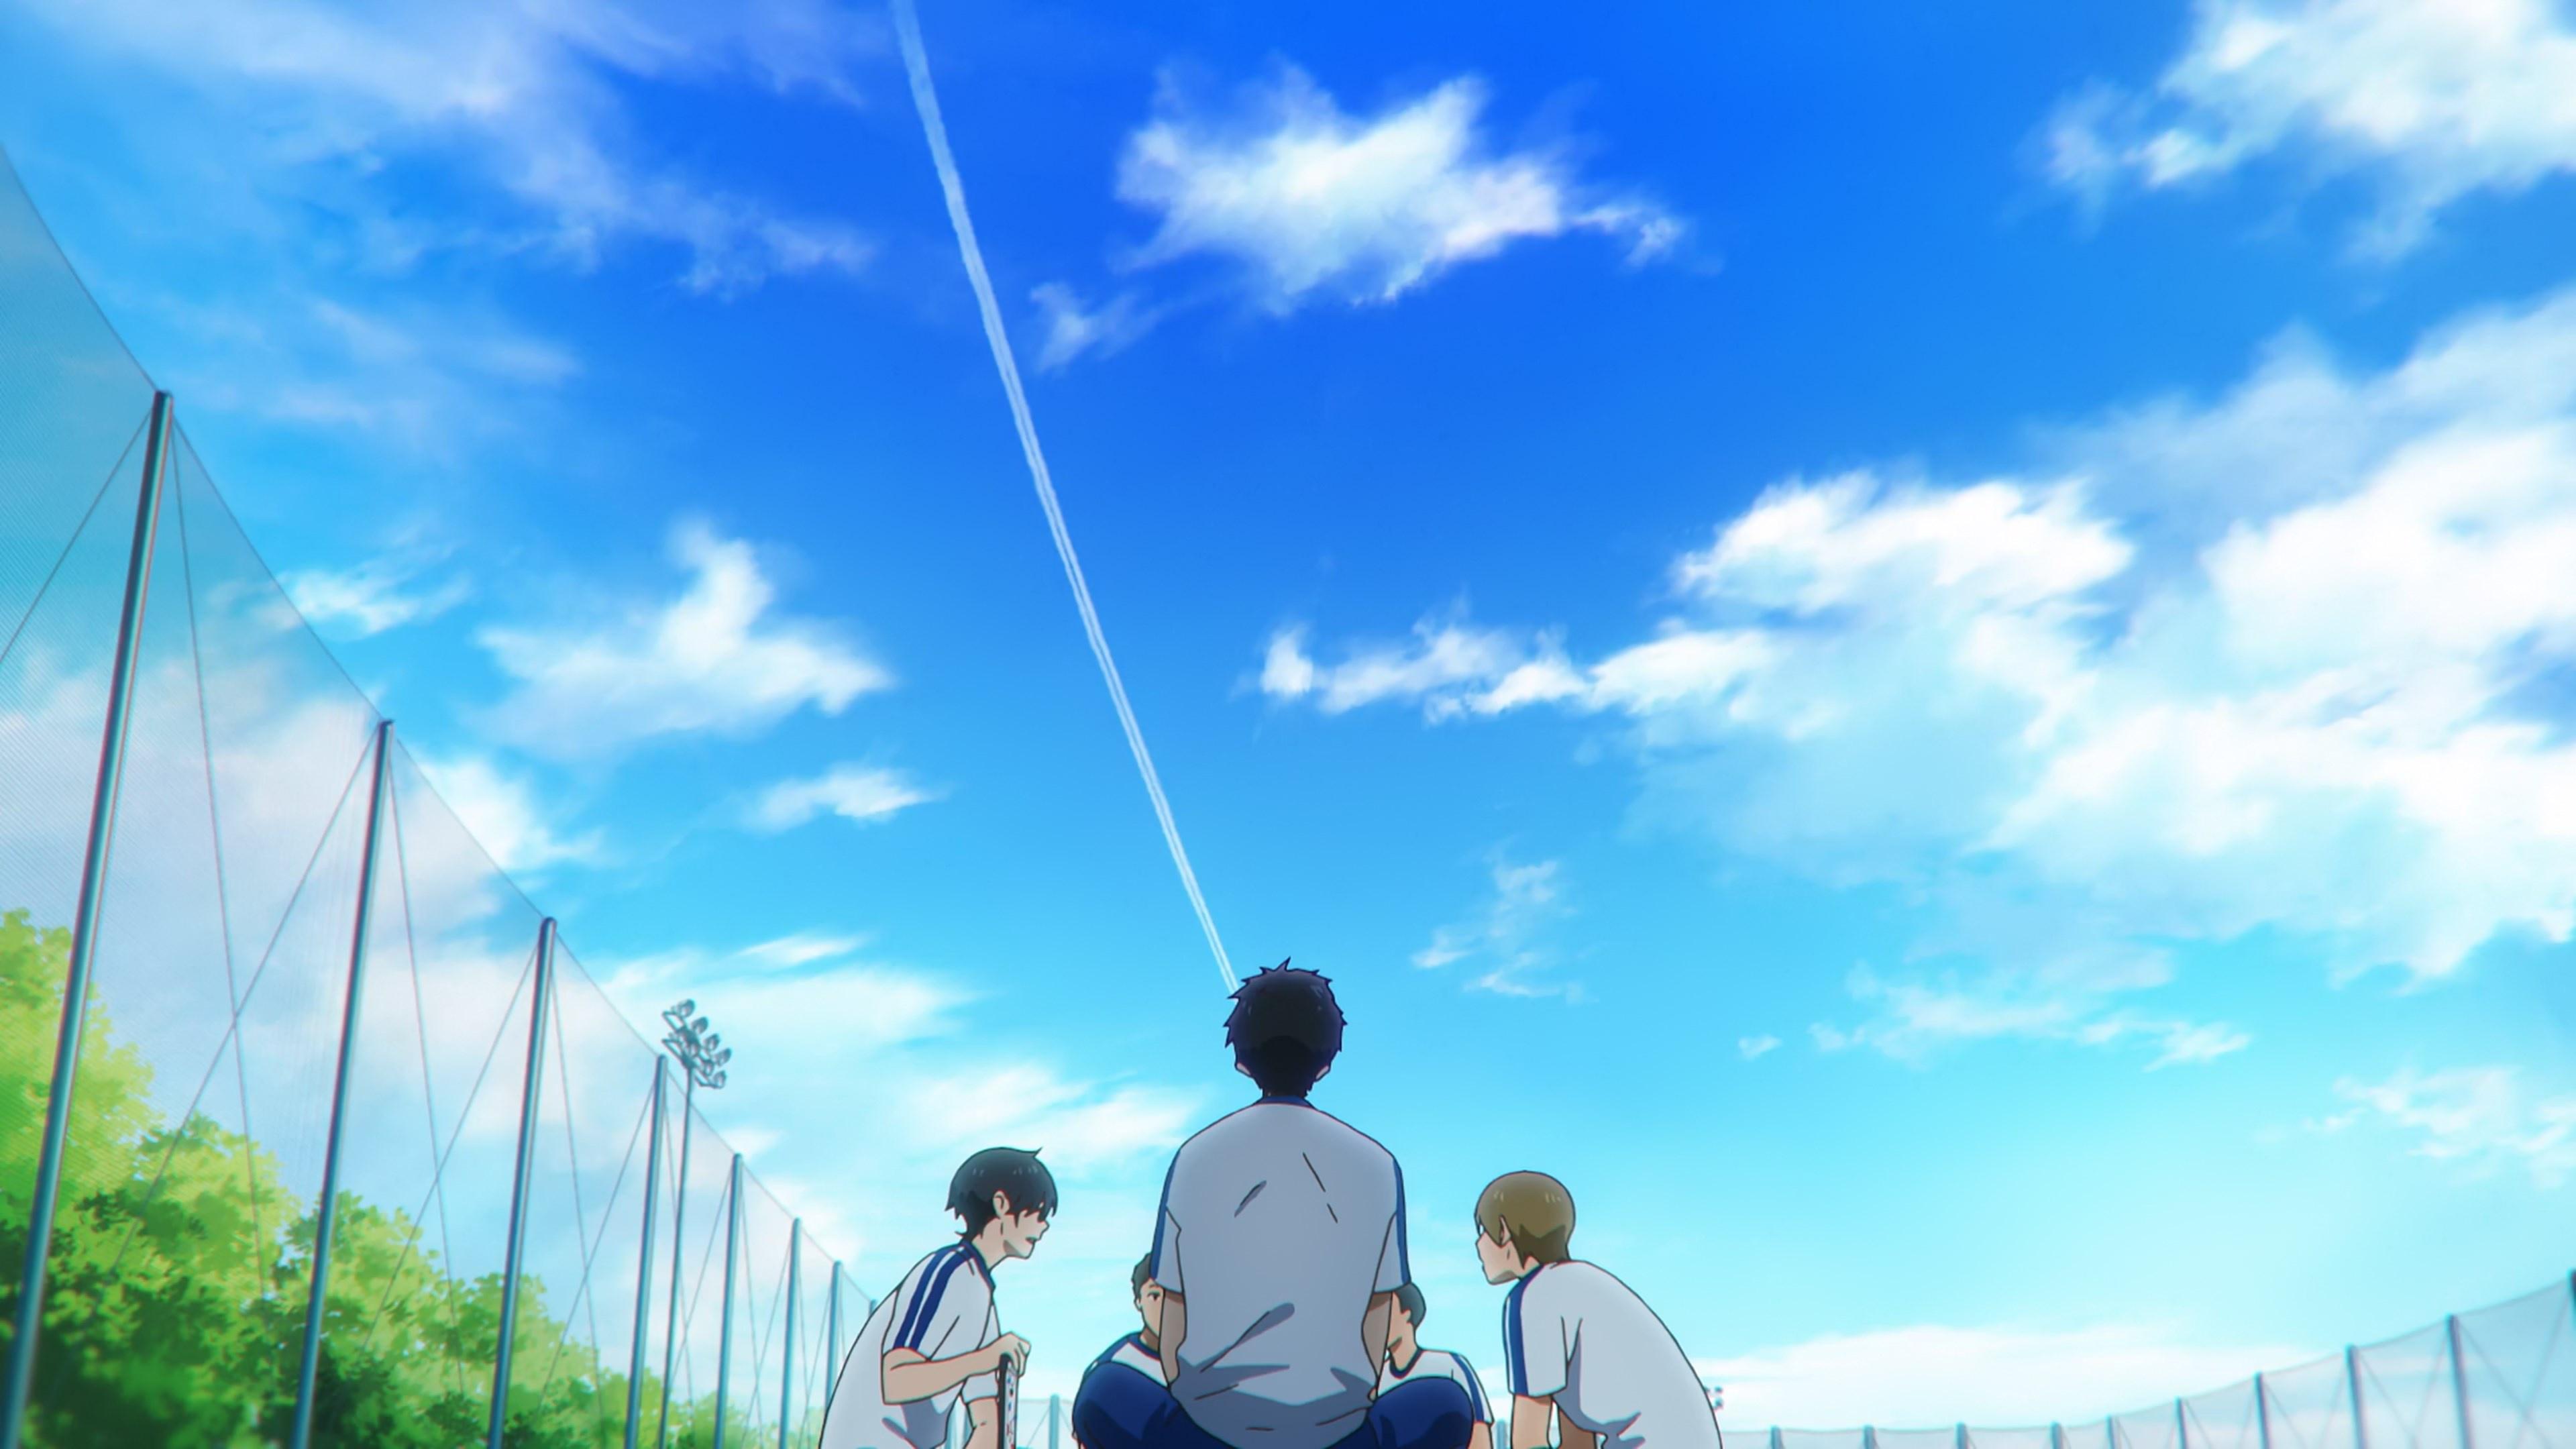 Tsurune The Movie: The First Shot - North Park Theatre